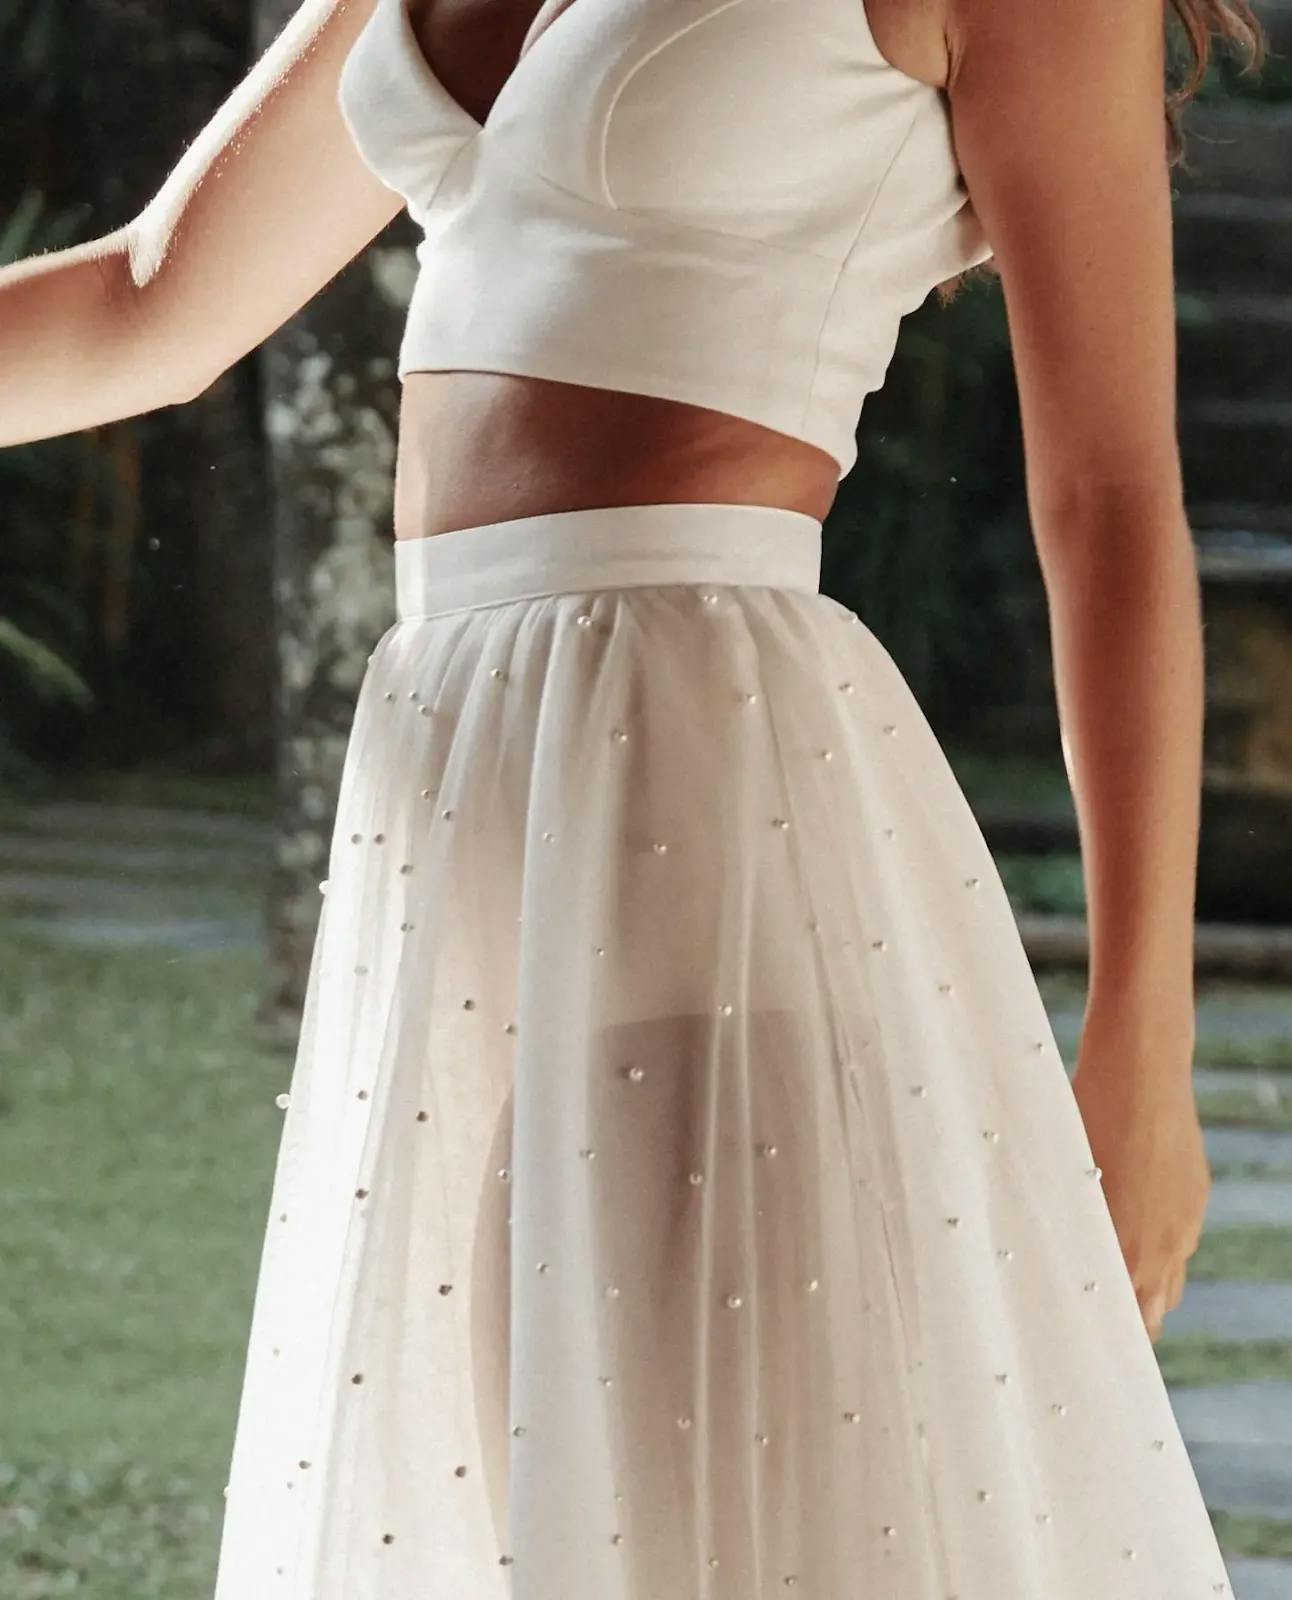 A woman is wearing a white two-piece outfit. The top is a sleeveless crop top with a deep neckline, and the bottom is a high-waisted, sheer, flowy skirt adorned with small, sporadic pearl-like beads. The background is an outdoor setting with green foliage.